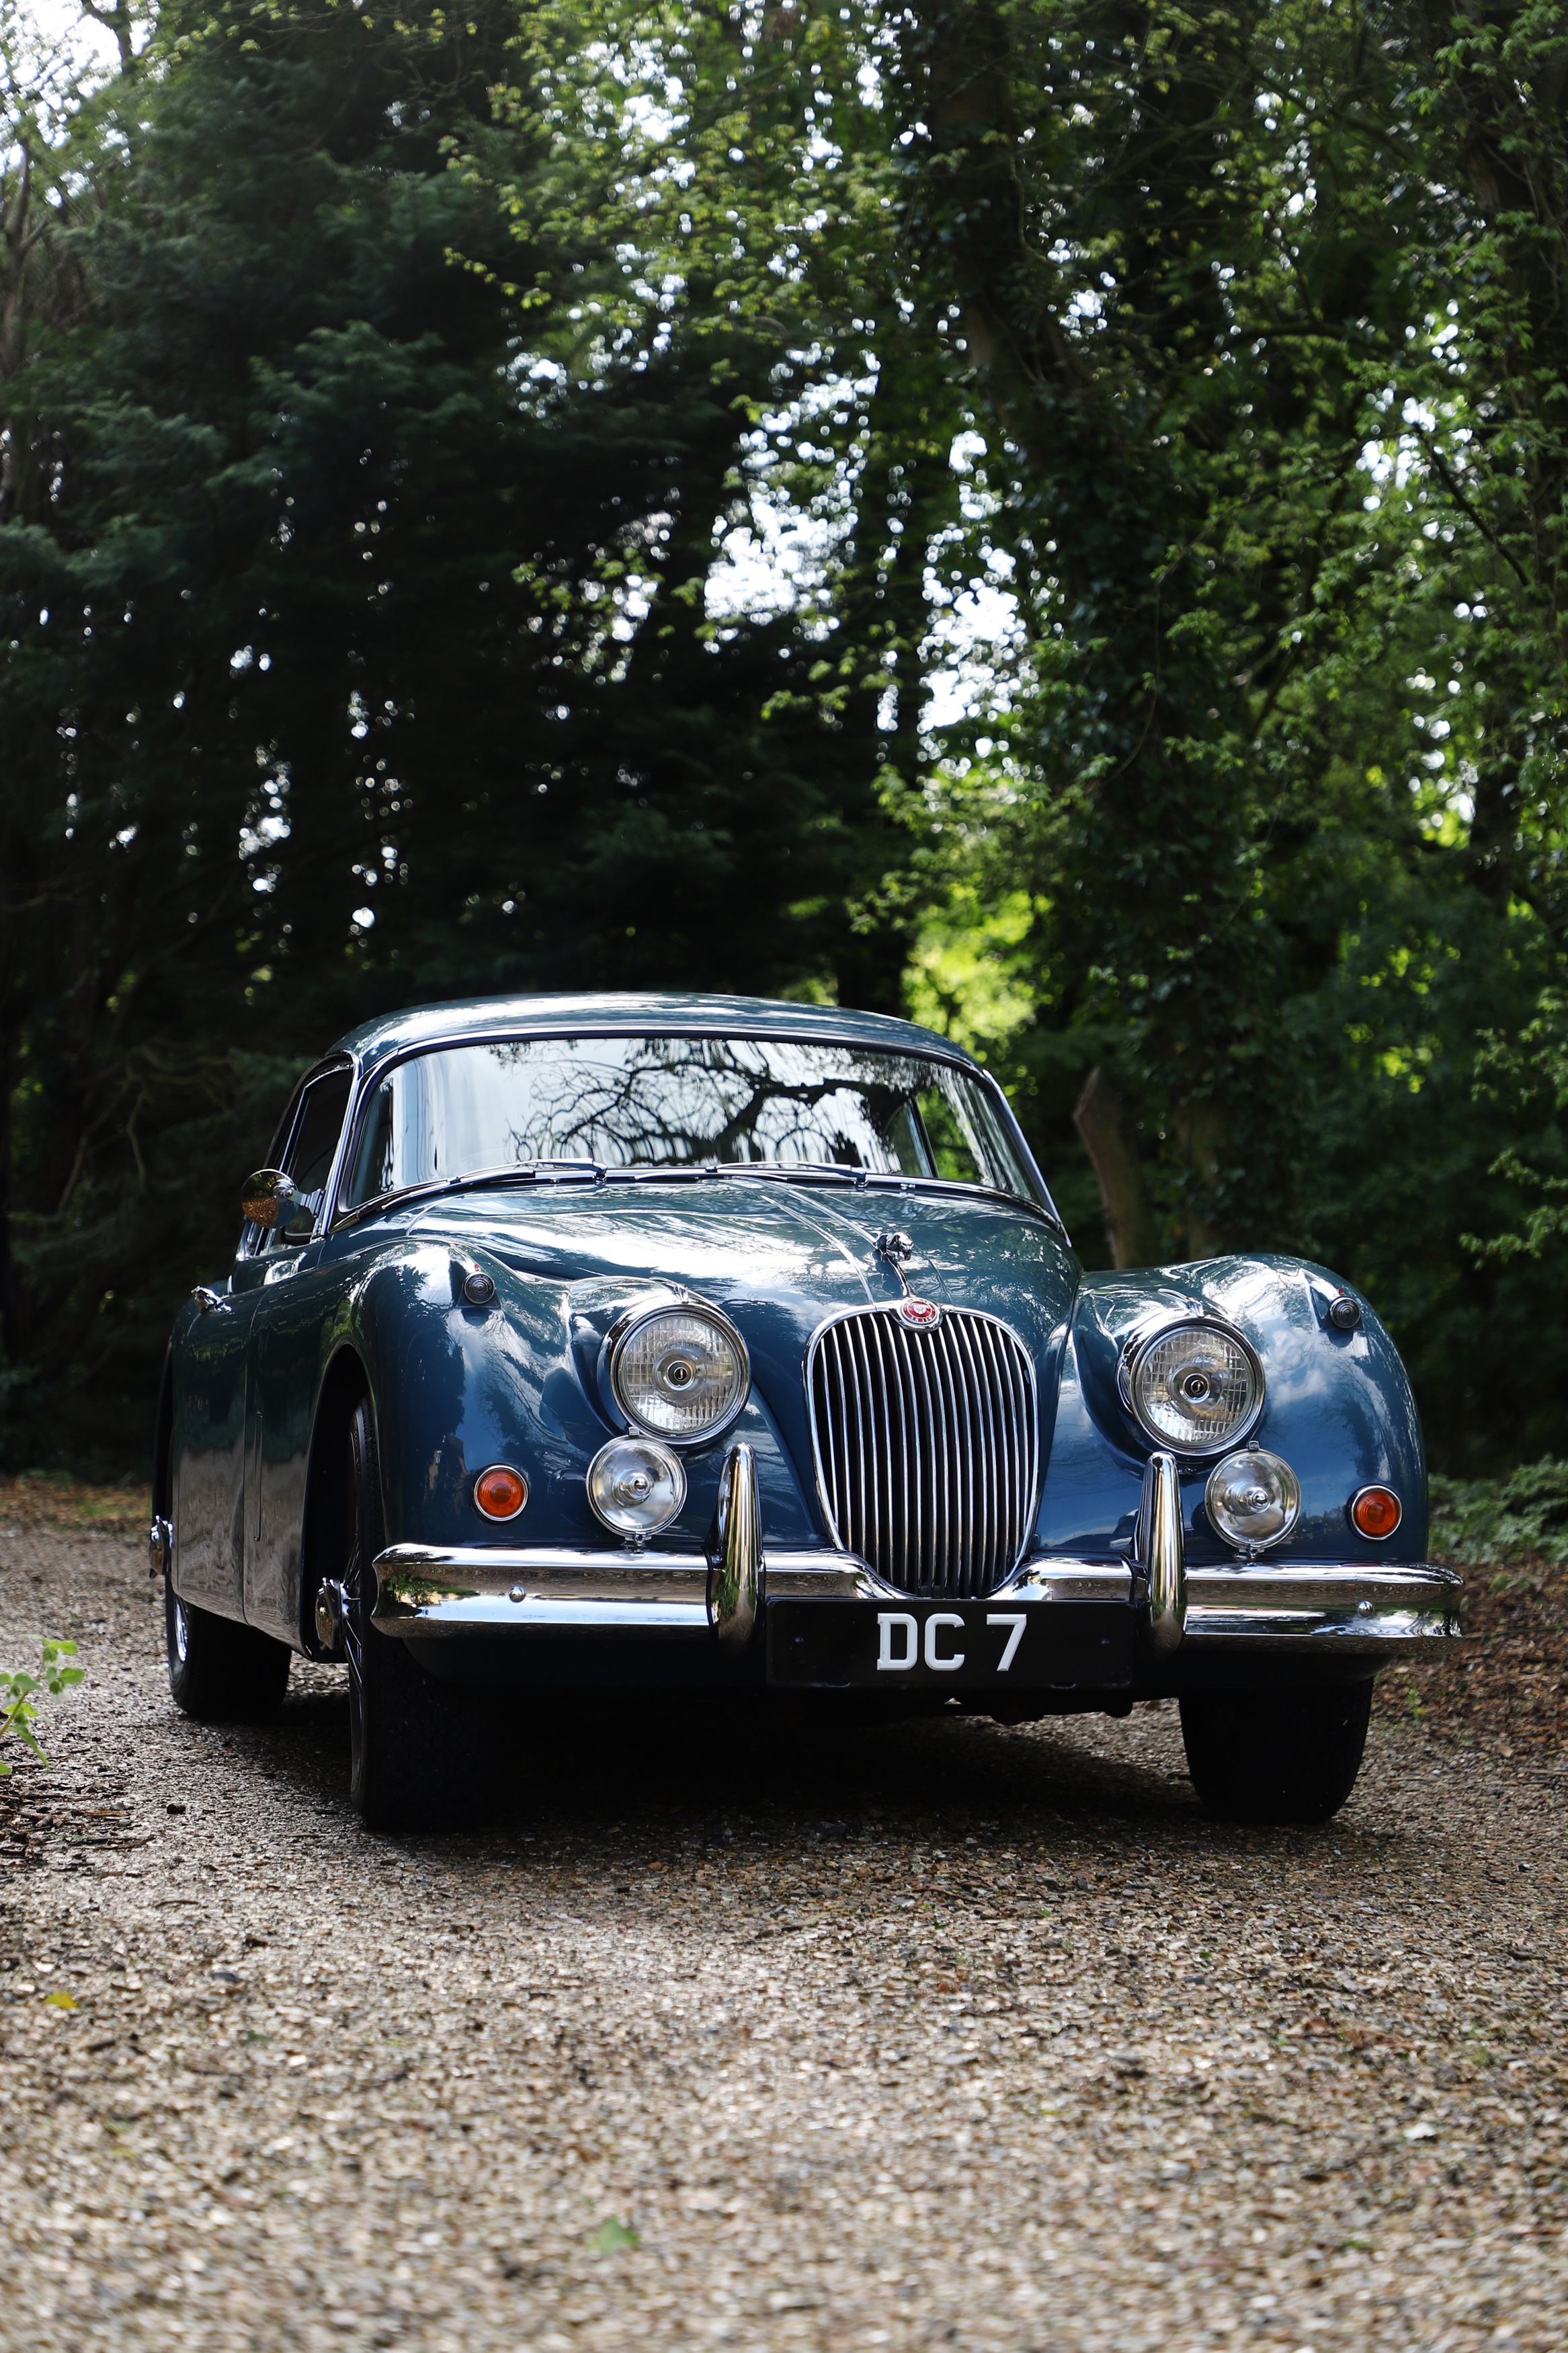 1958 Jaguar XK150 SE Fixed Head Coupé - Formerly the Property of Donald Campbell CBE (£150,000-170,000)